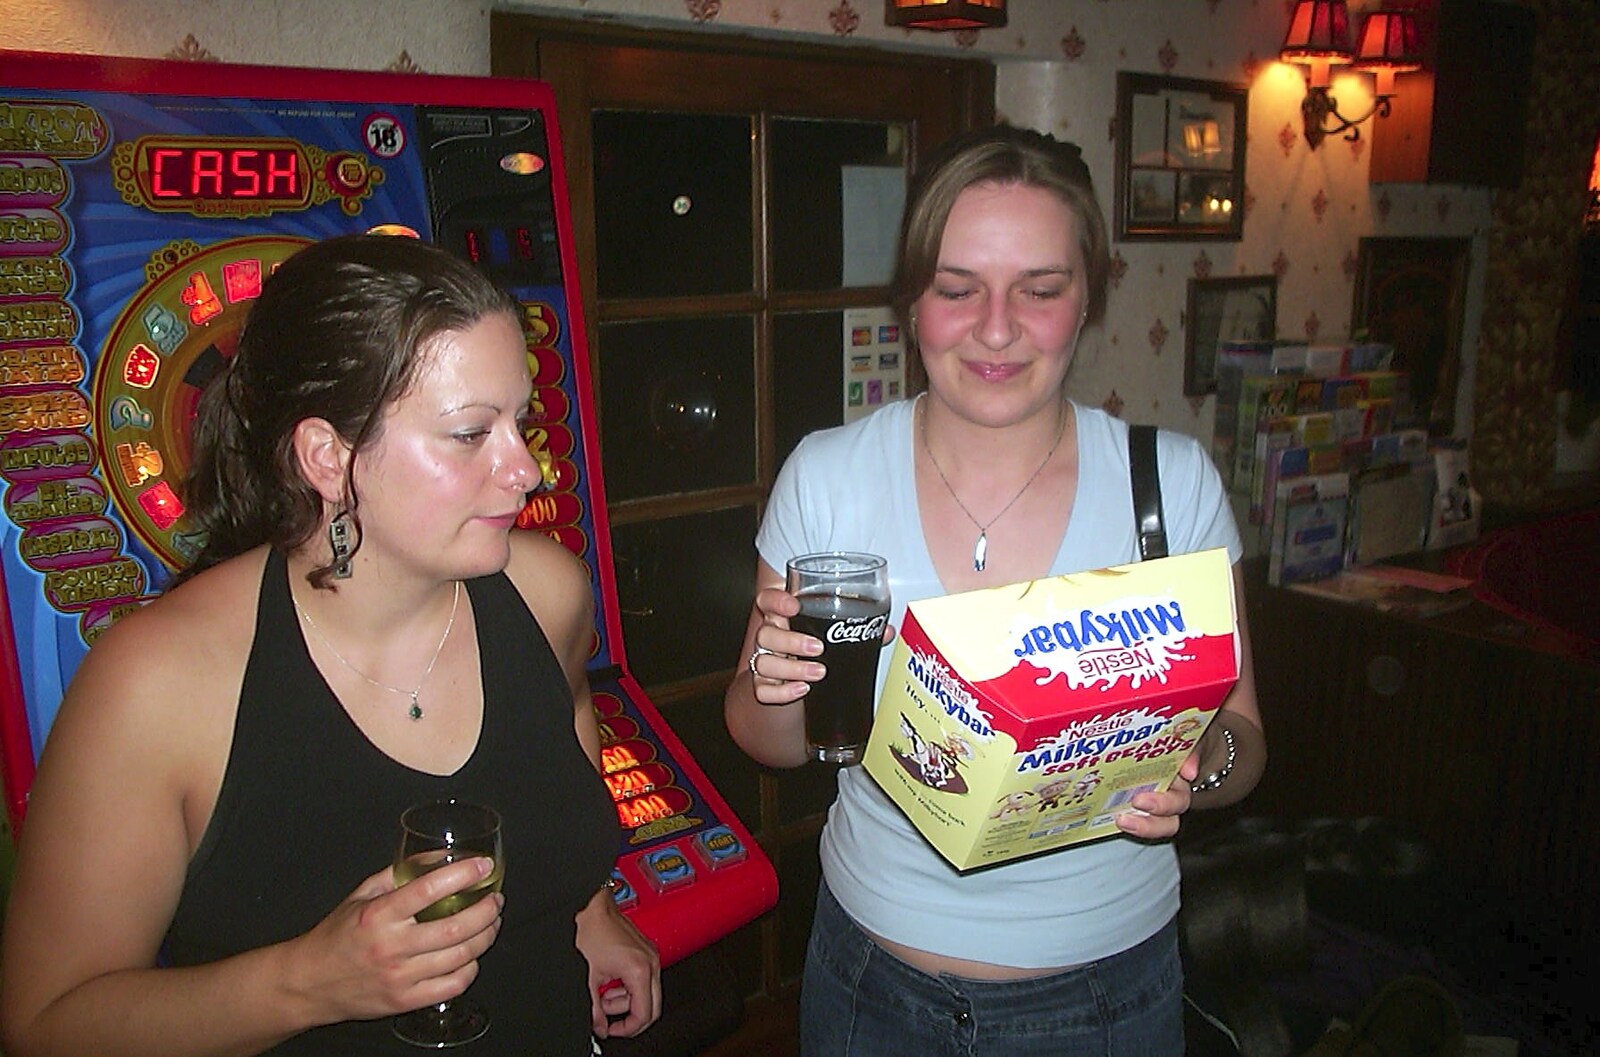 Wednesday and Thursday: The BSCC Season Opens, and Stuff Happens, Suffolk - 9th April 2004: Jess gets a Milky Way egg